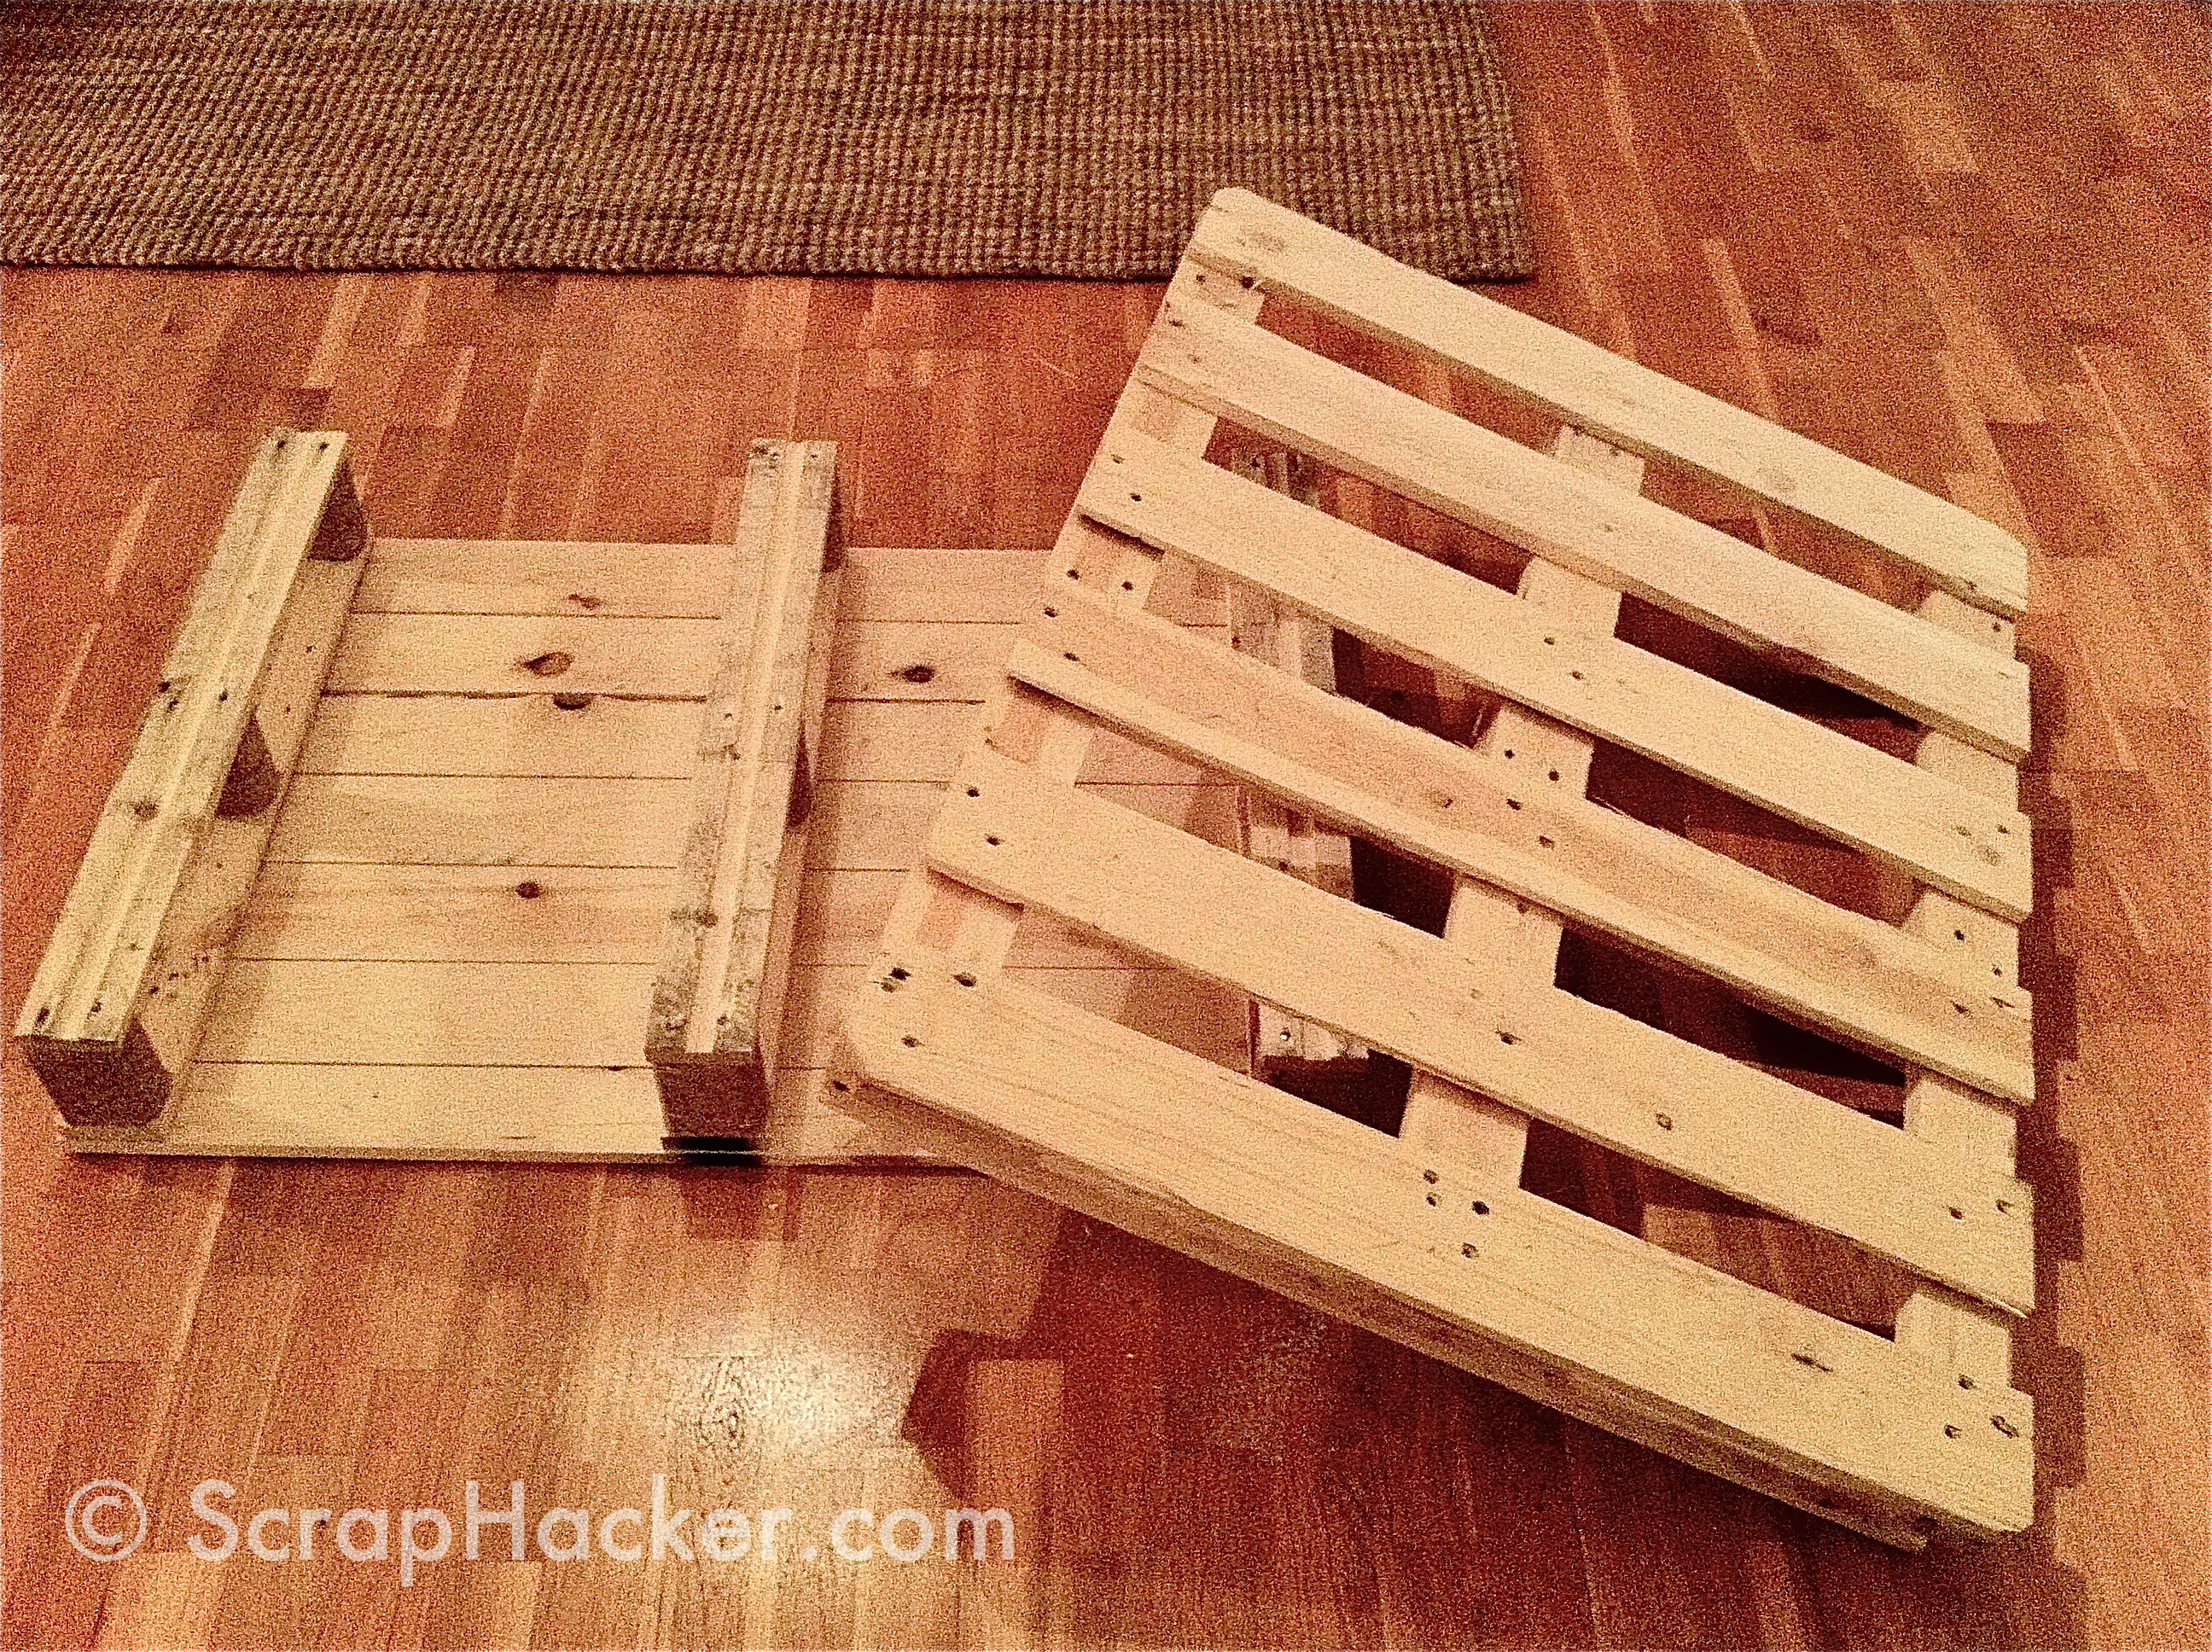 Woodworking diy pallet coffee table instructions PDF Free Download